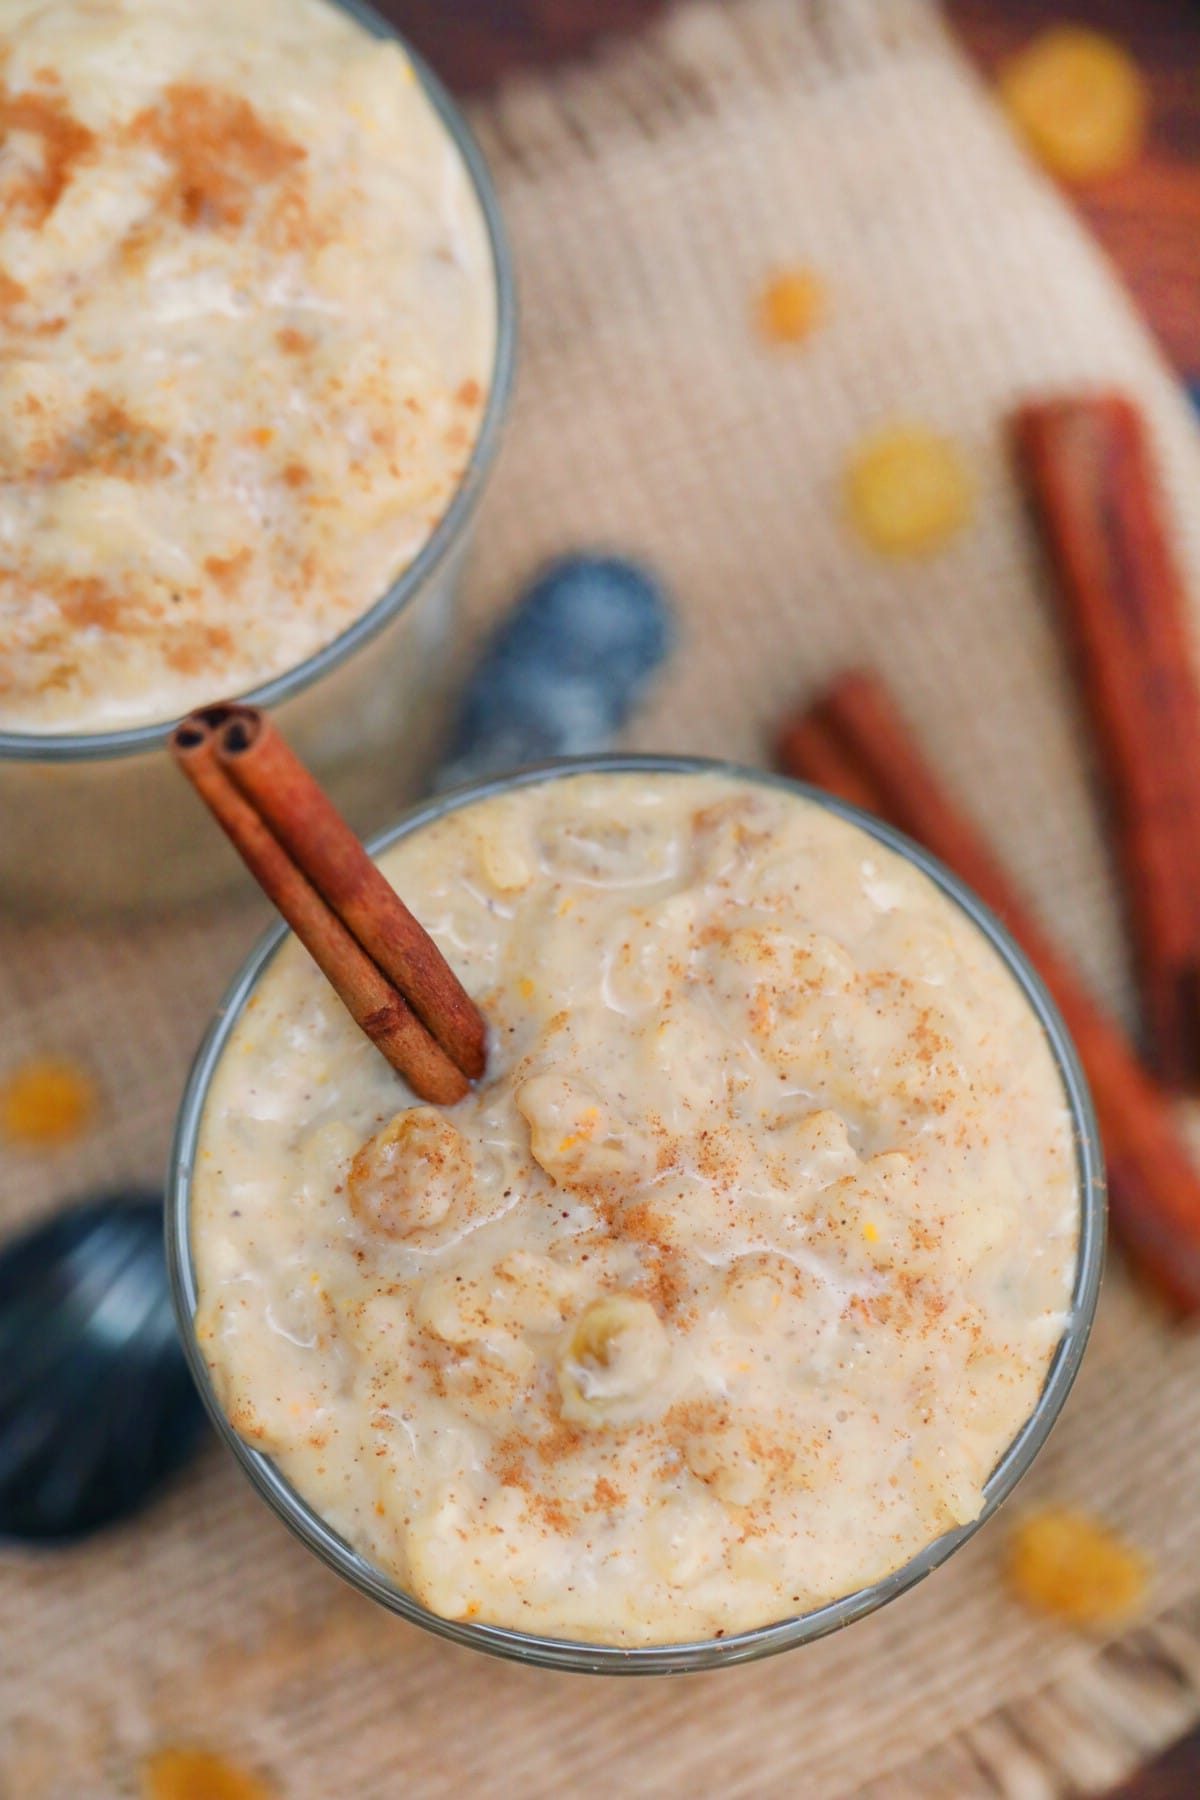 Rice pudding in glass with cinnamon stick